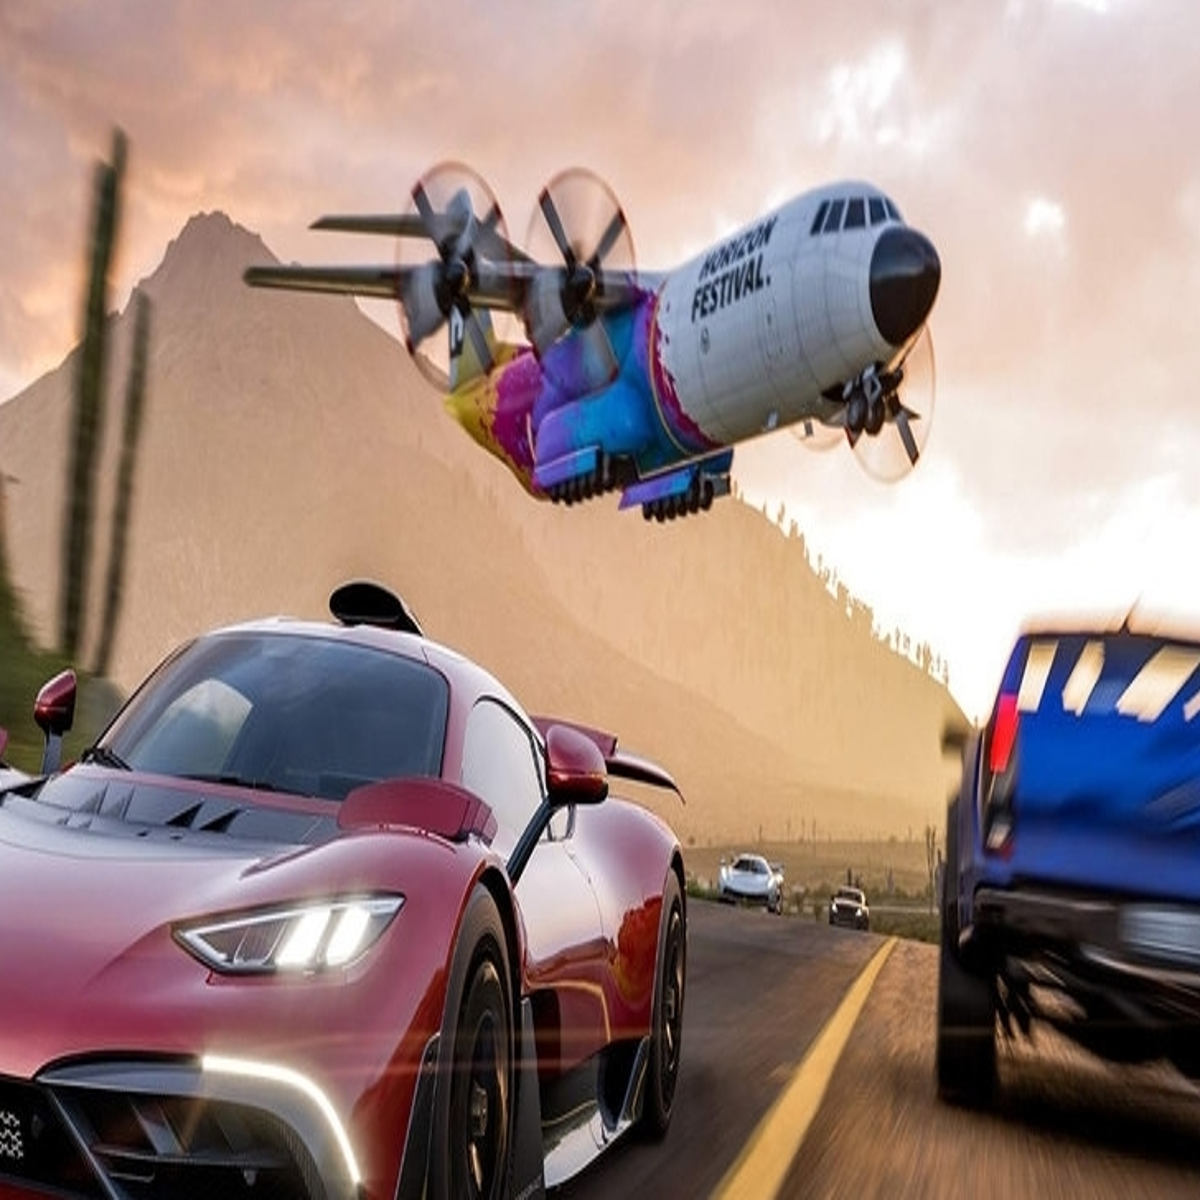 Microsoft Forza Motorsport 5: Racing Game of the Year PK2-00001